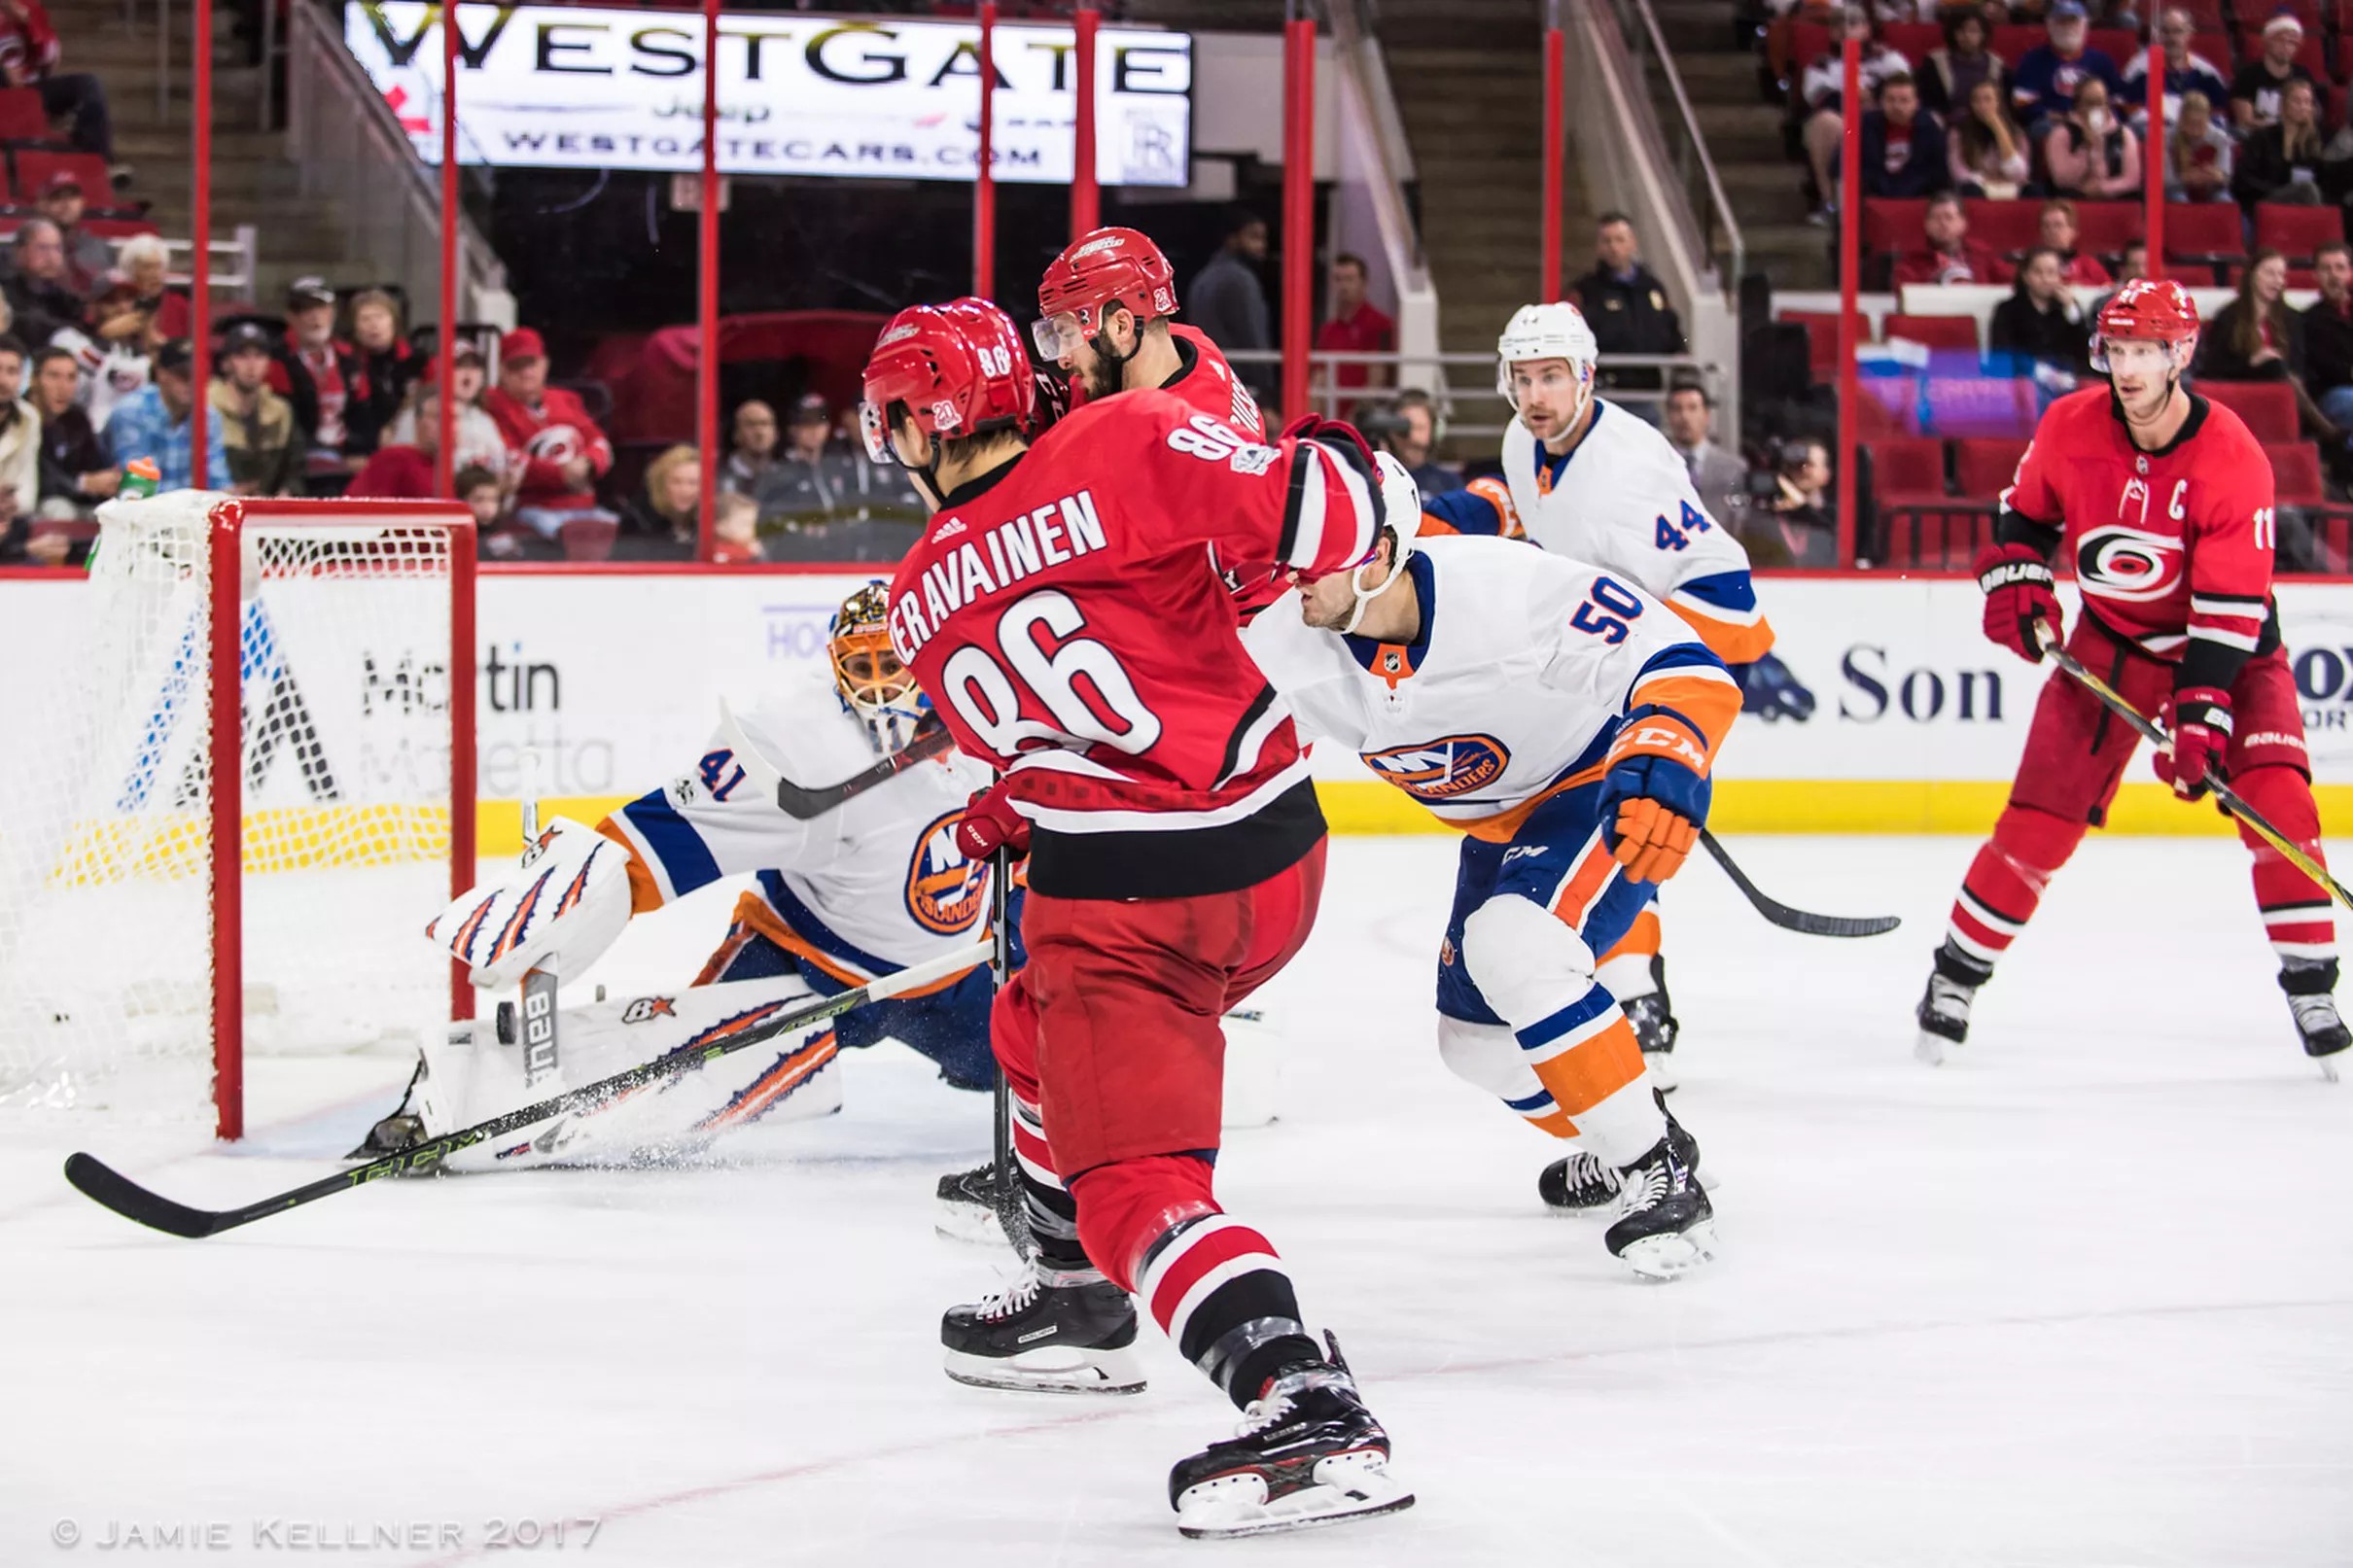 Carolina Hurricanes vs. New York Islanders Game Preview and Discussion